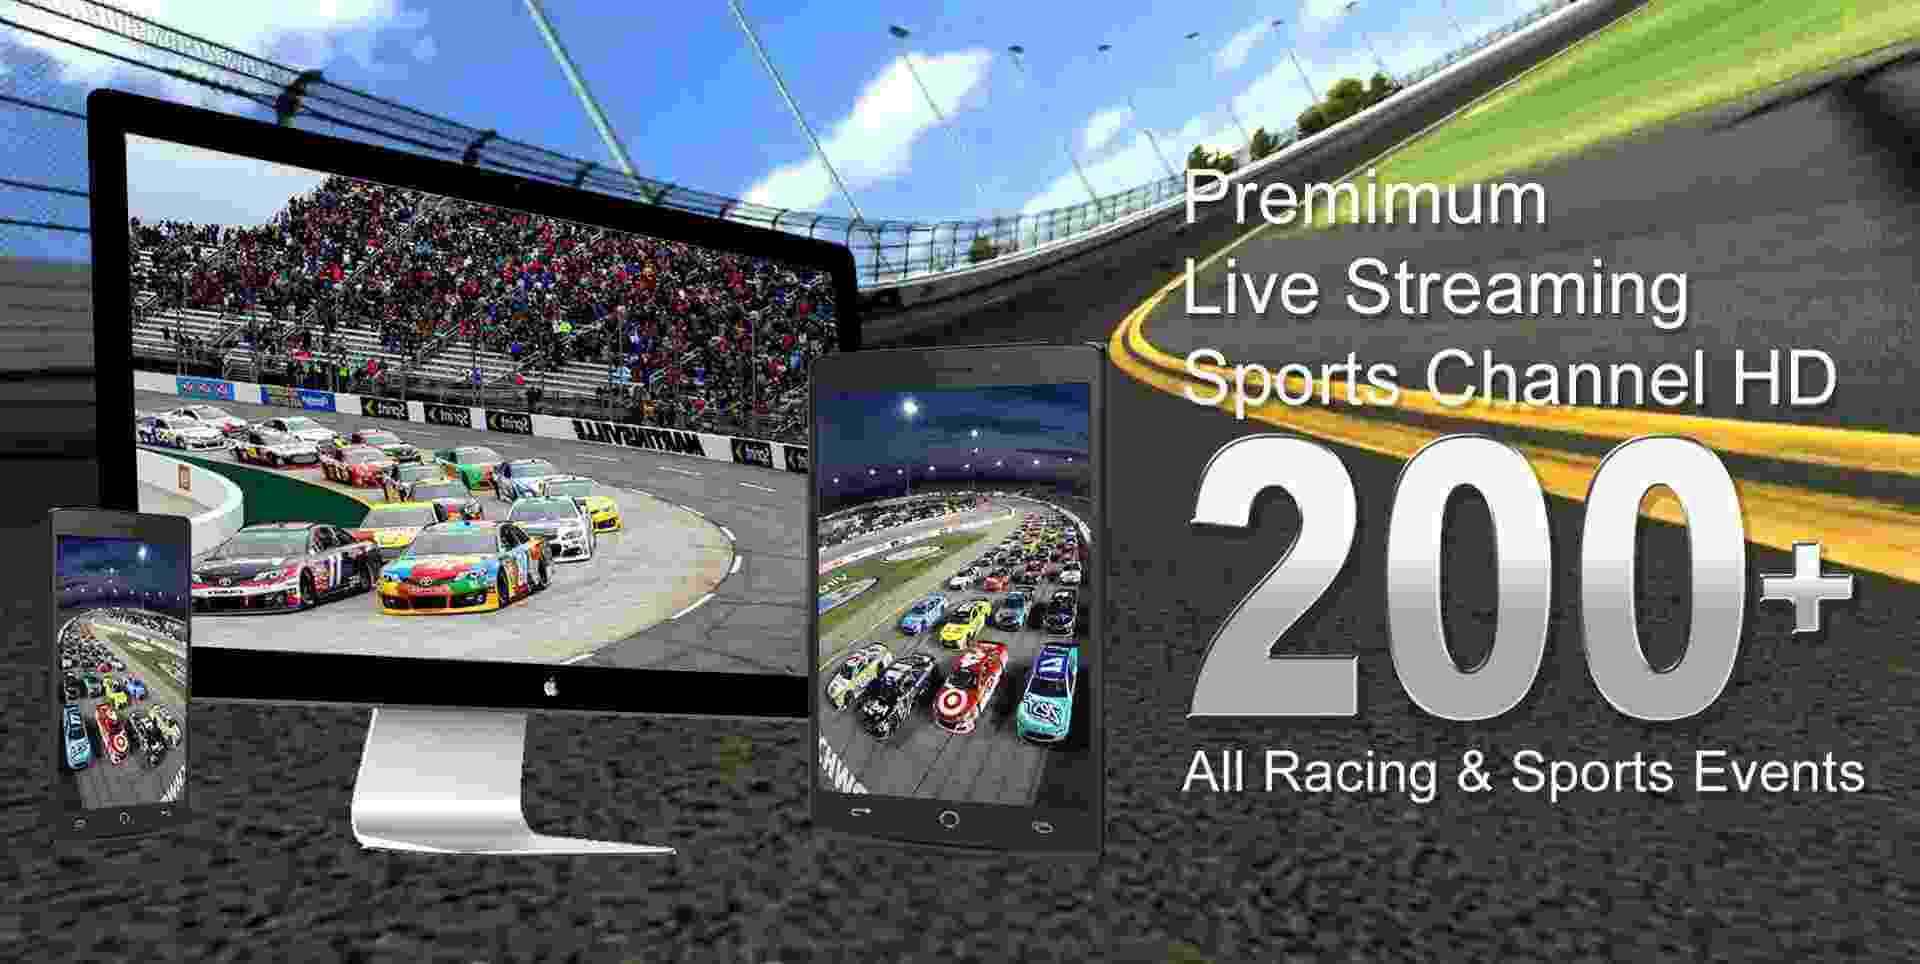 Truck Series Texas Roadhouse 200 at Martinsville